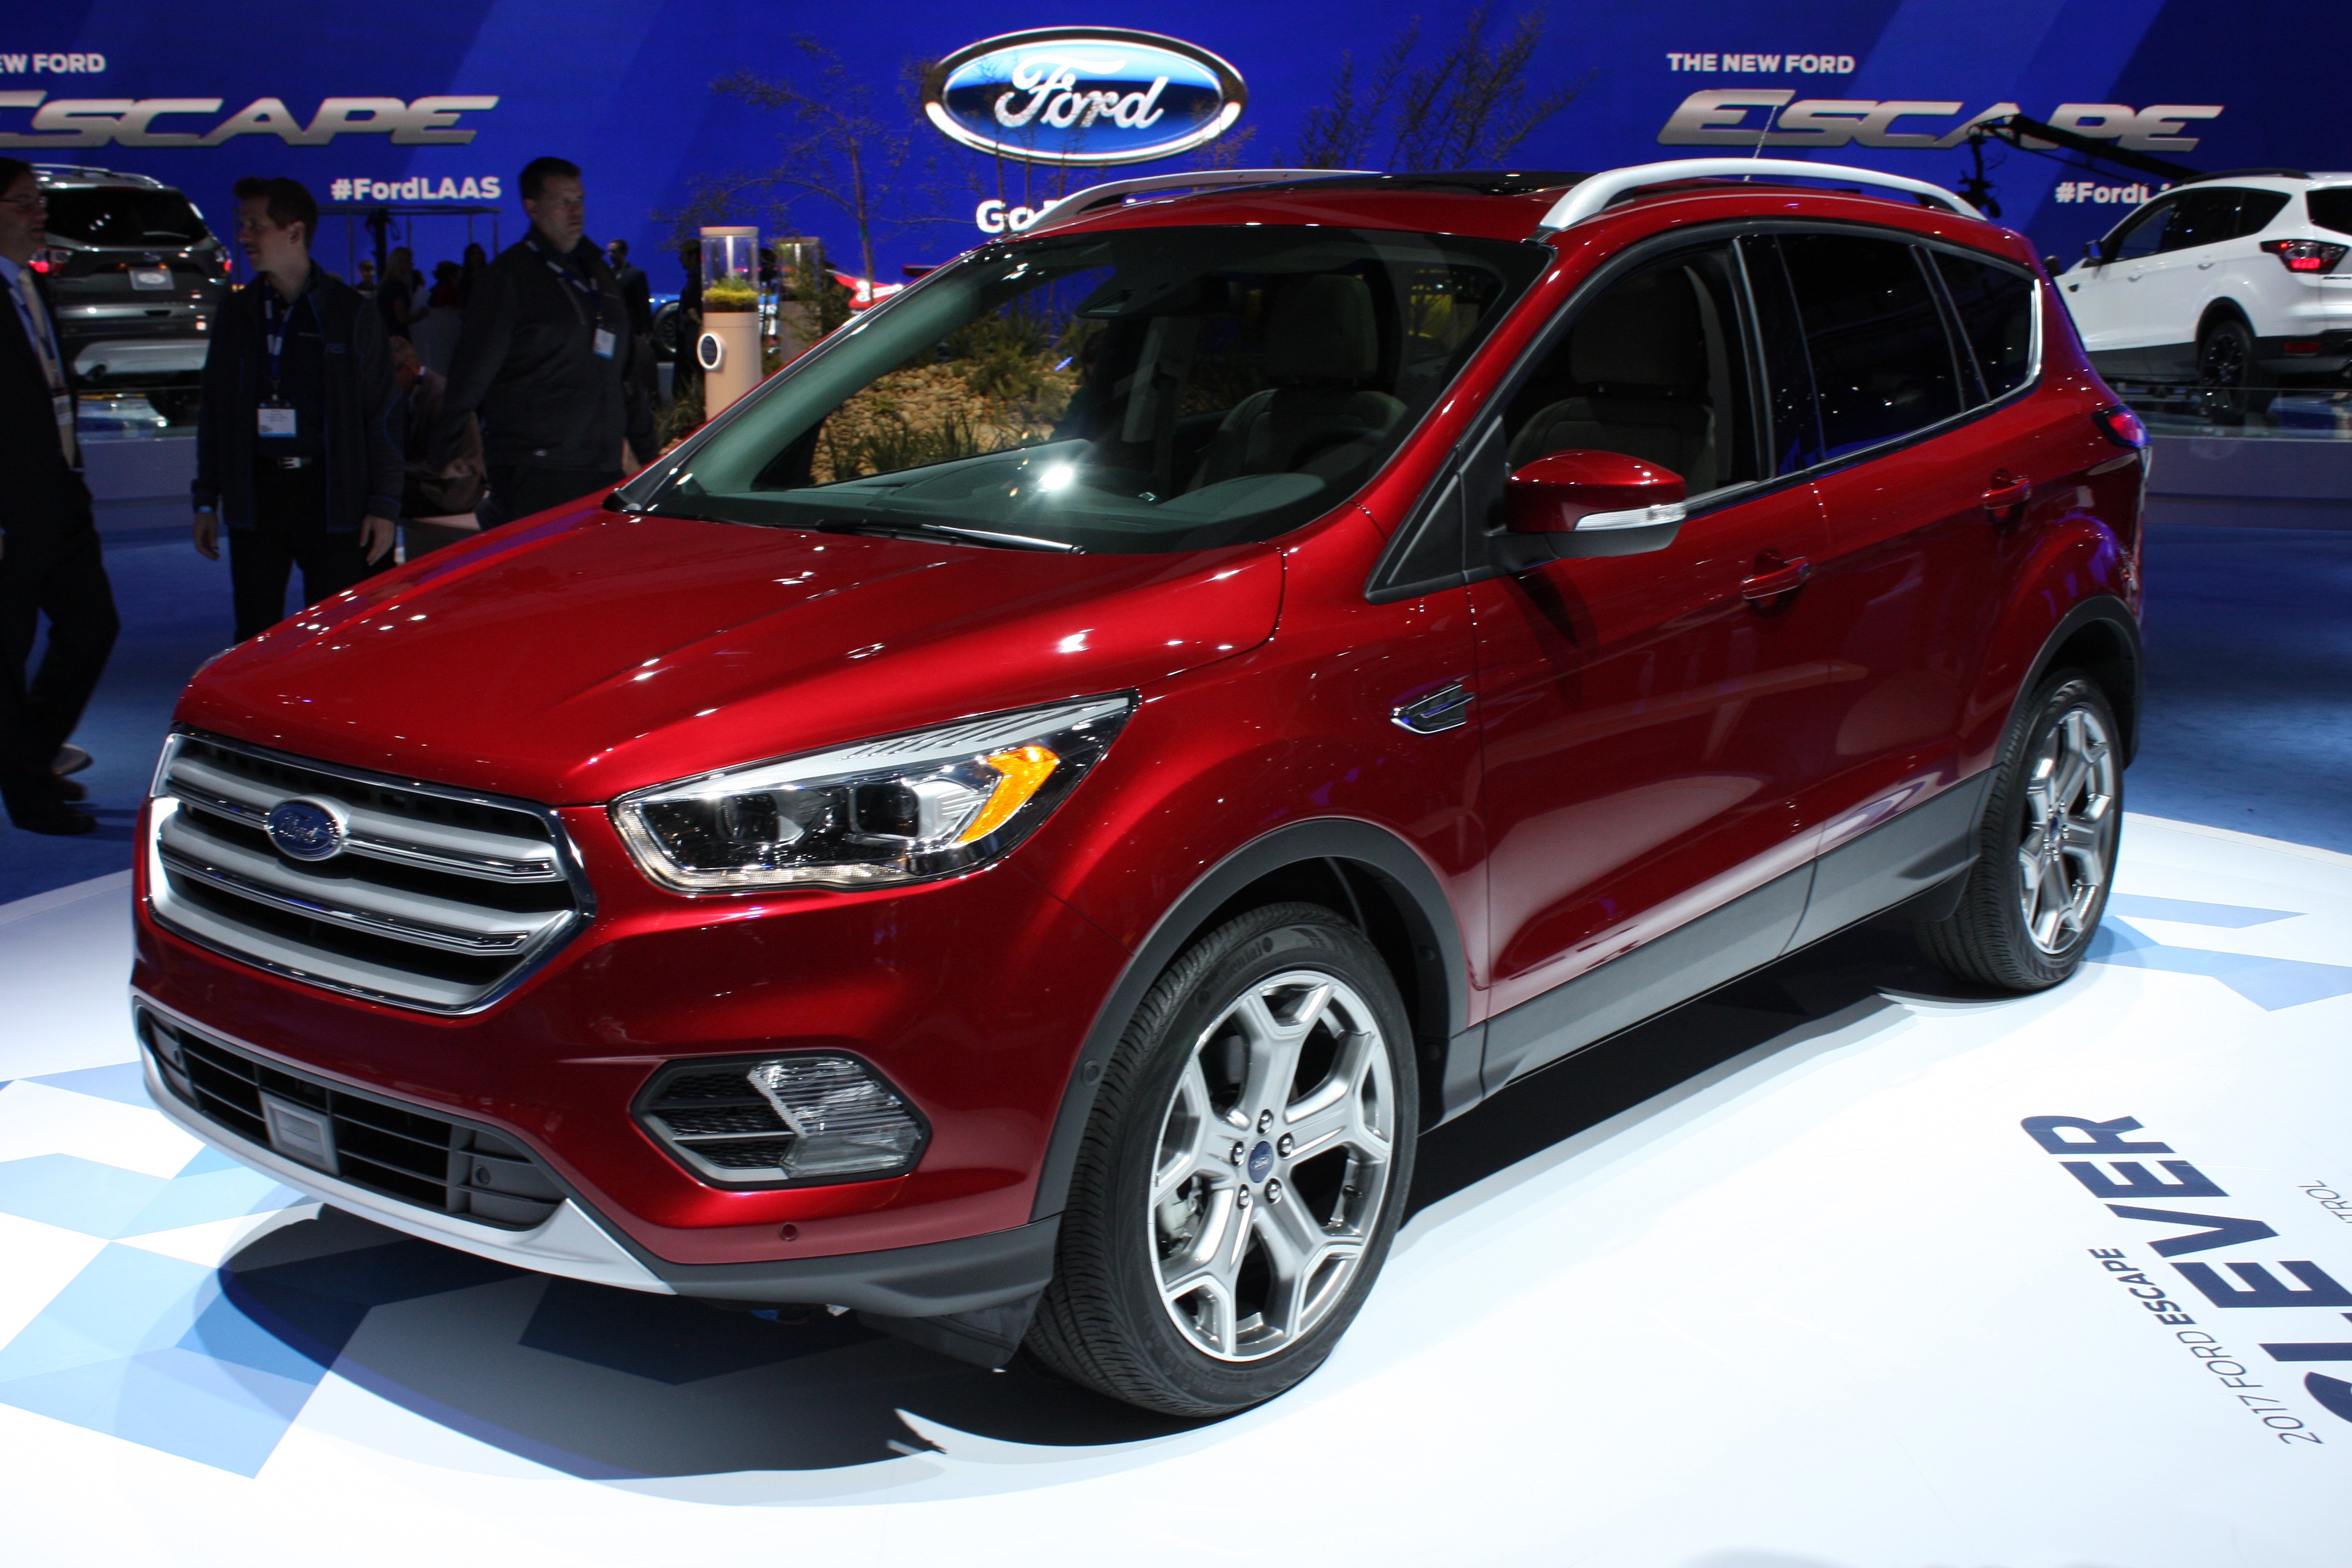 2017 Ford Escape Debuts With New Look, More Tech